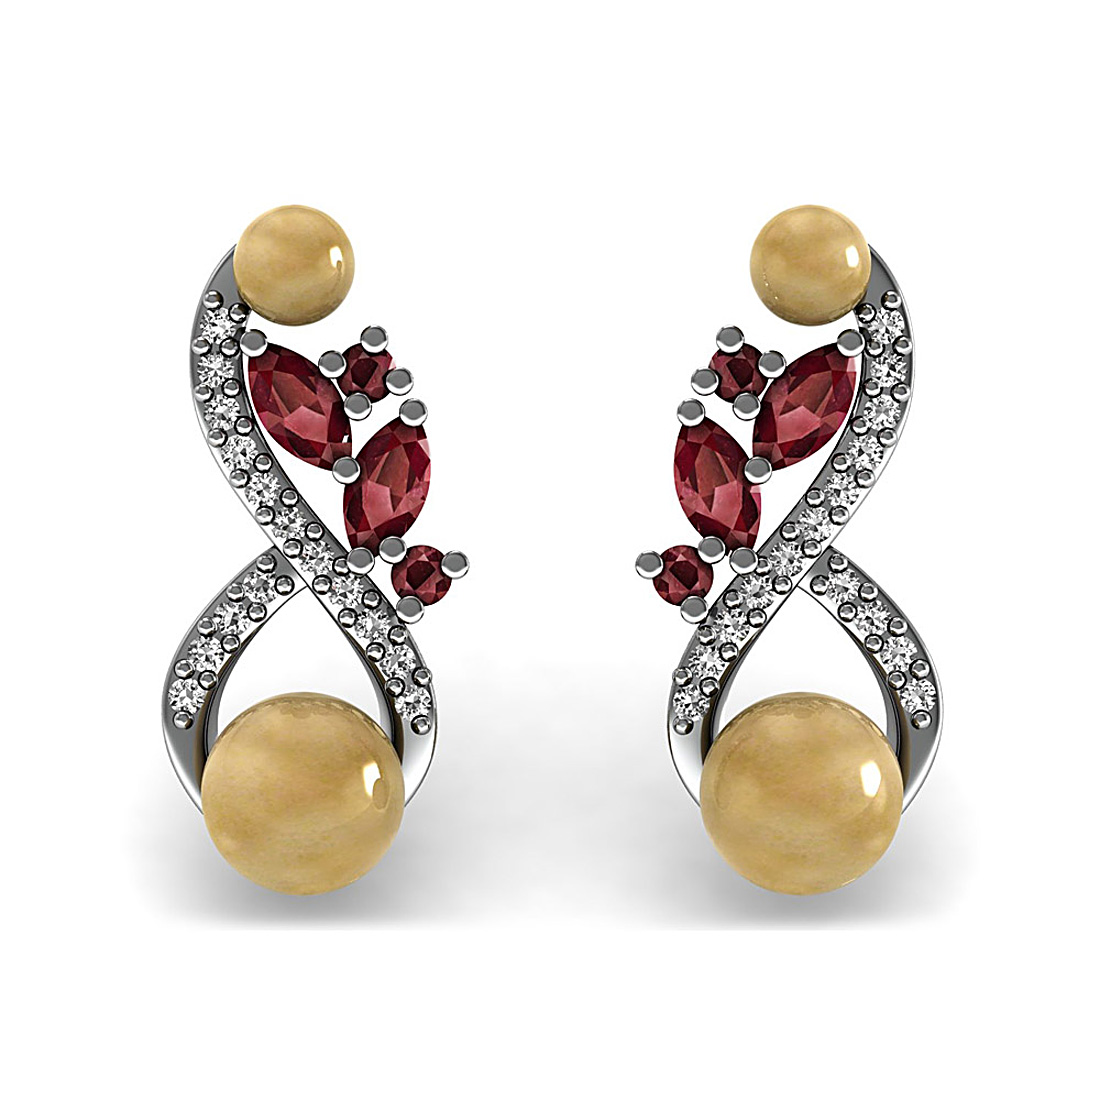 Natural ruby and pearl gemstone stud earrings made in 18k solid white gold adorned with genuine diamond.